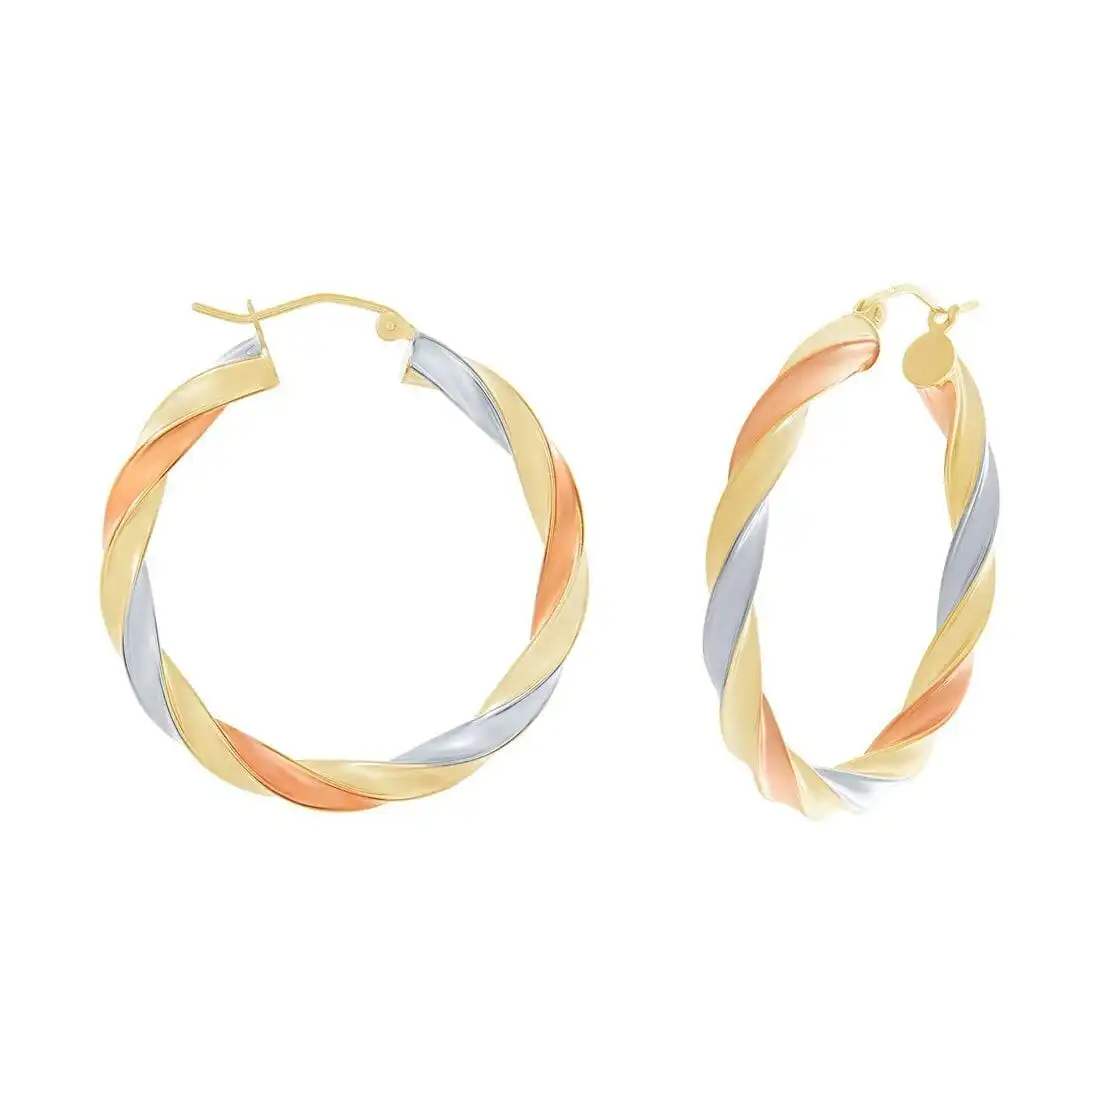 9ct Yellow Gold Three Tone Silver Infused Twist Earrings in 25mm